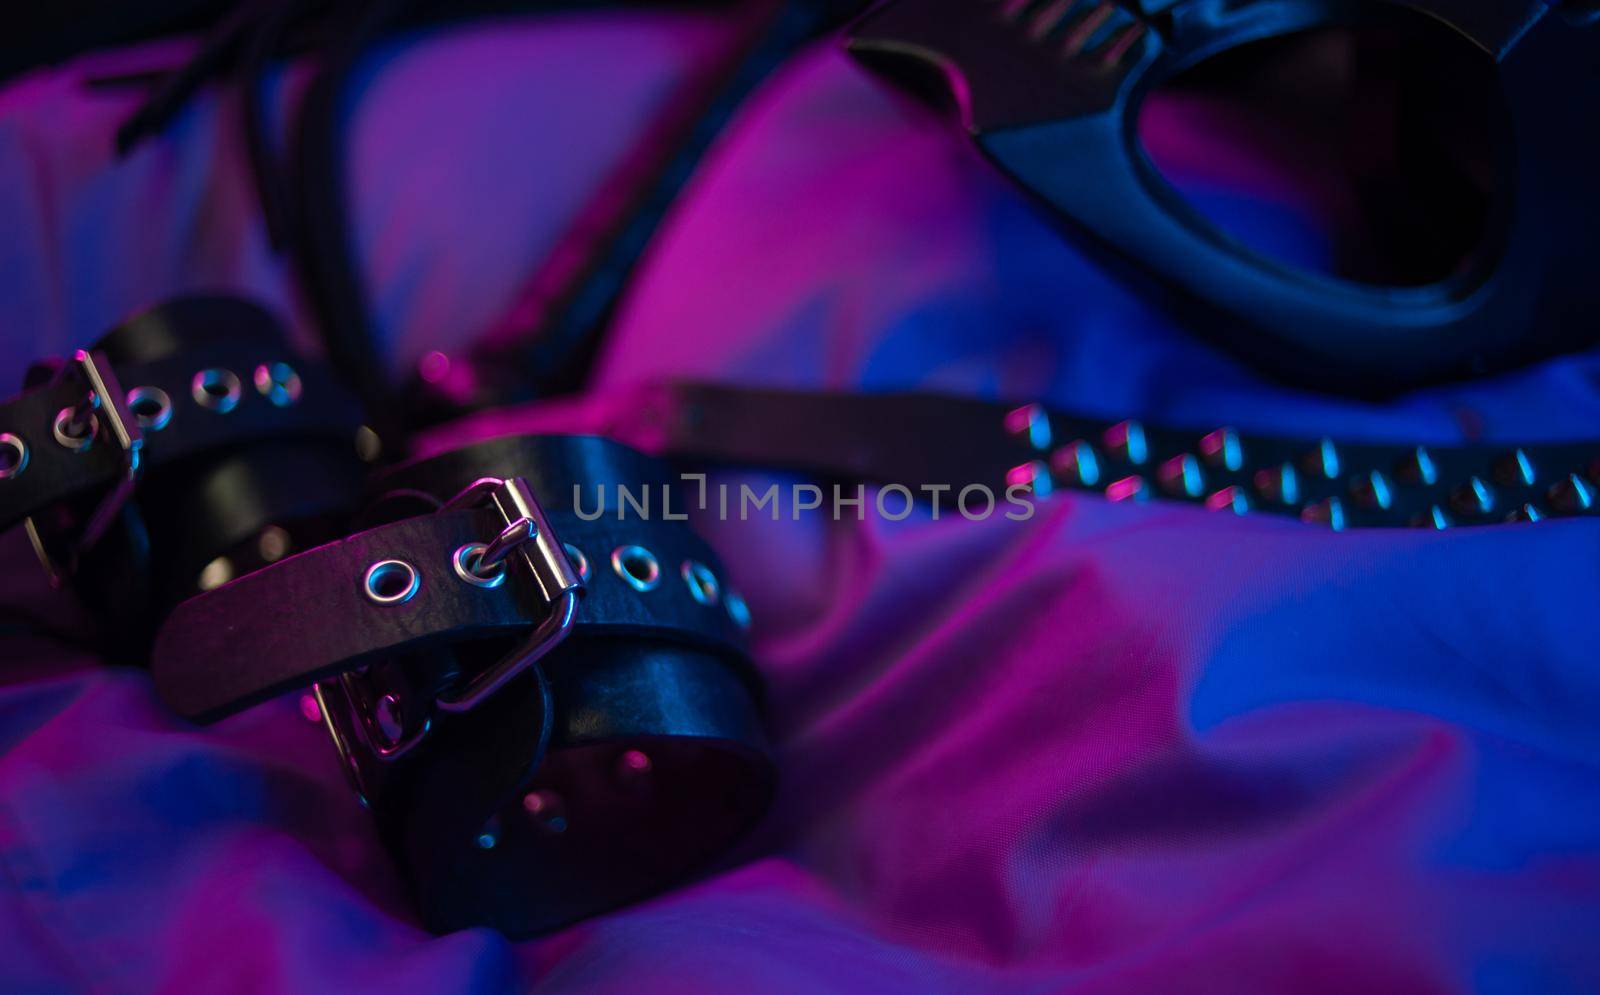 leather bdsm handcuffs and accessories for bdsm games in neon light by Rotozey